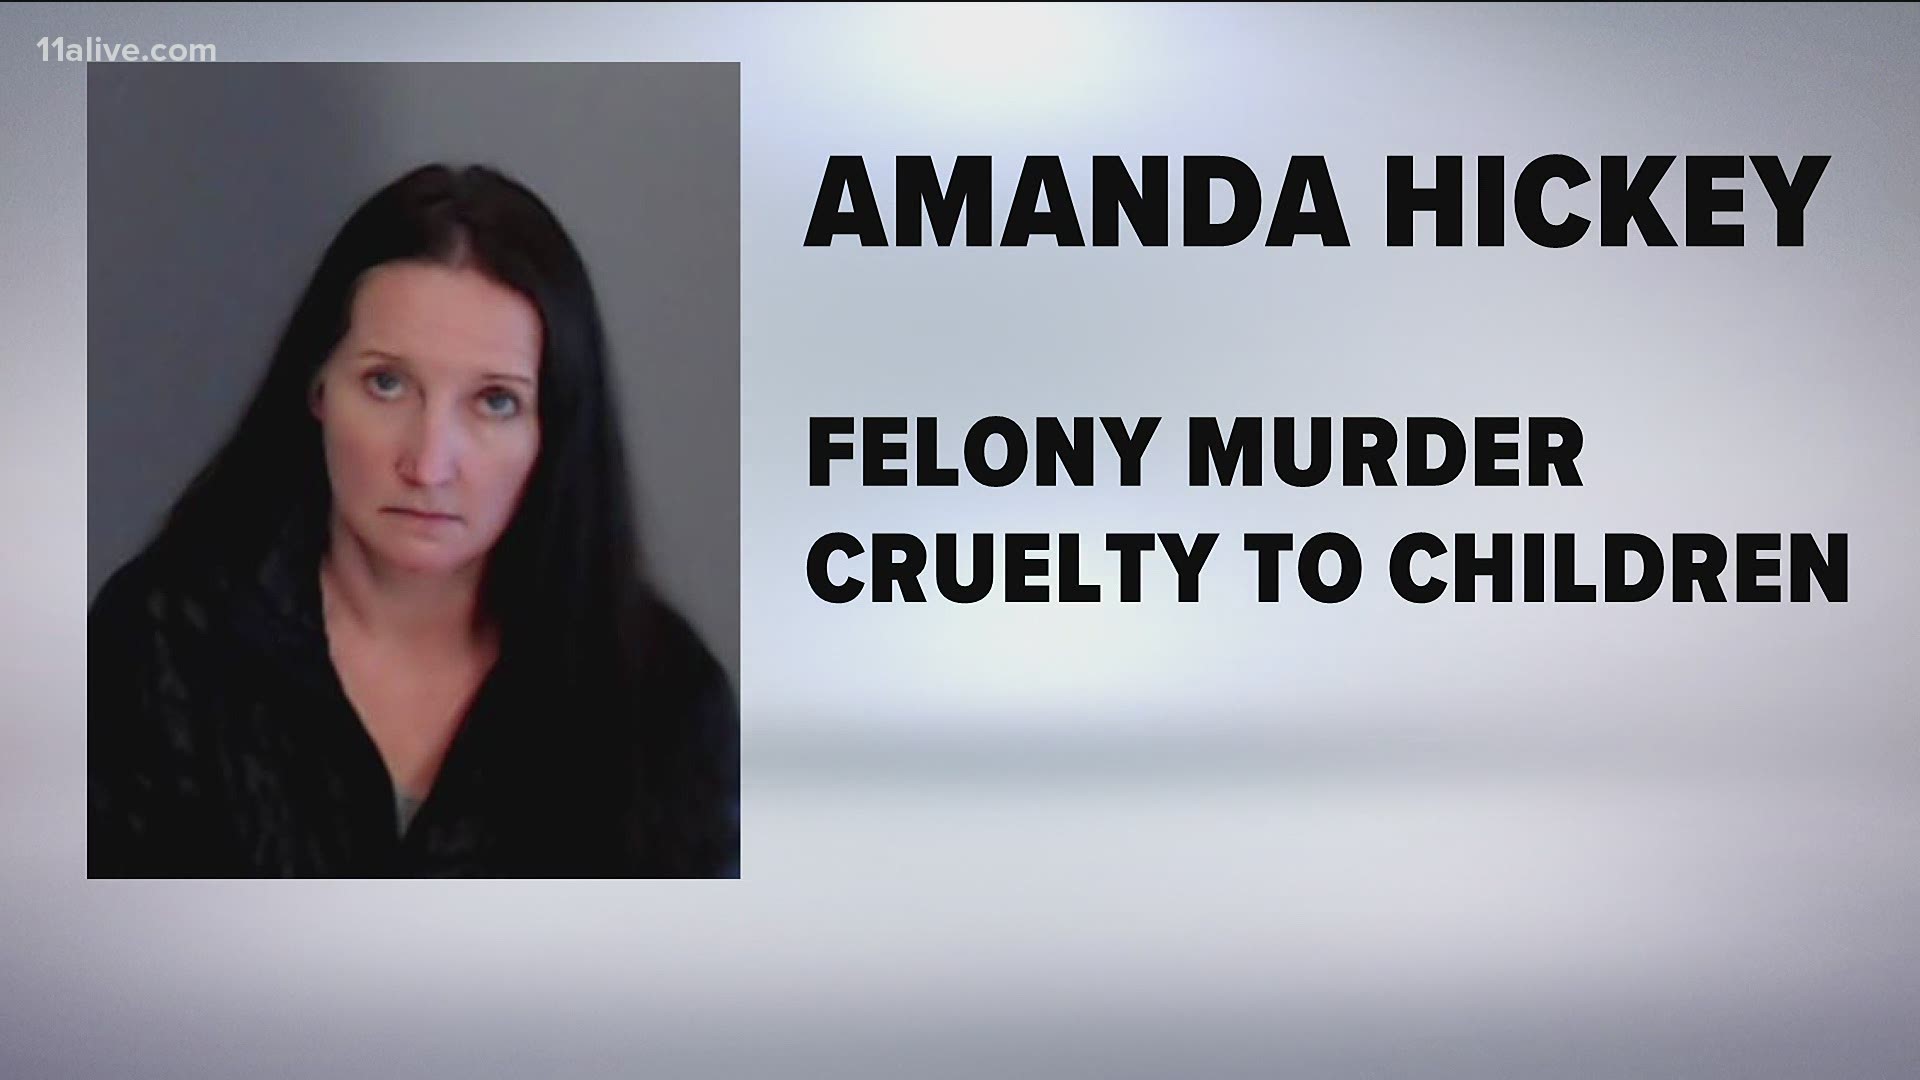 45-year-old Amanda Harris Hickey was arrested Friday and appeared before a DeKalb County judge on Saturday.